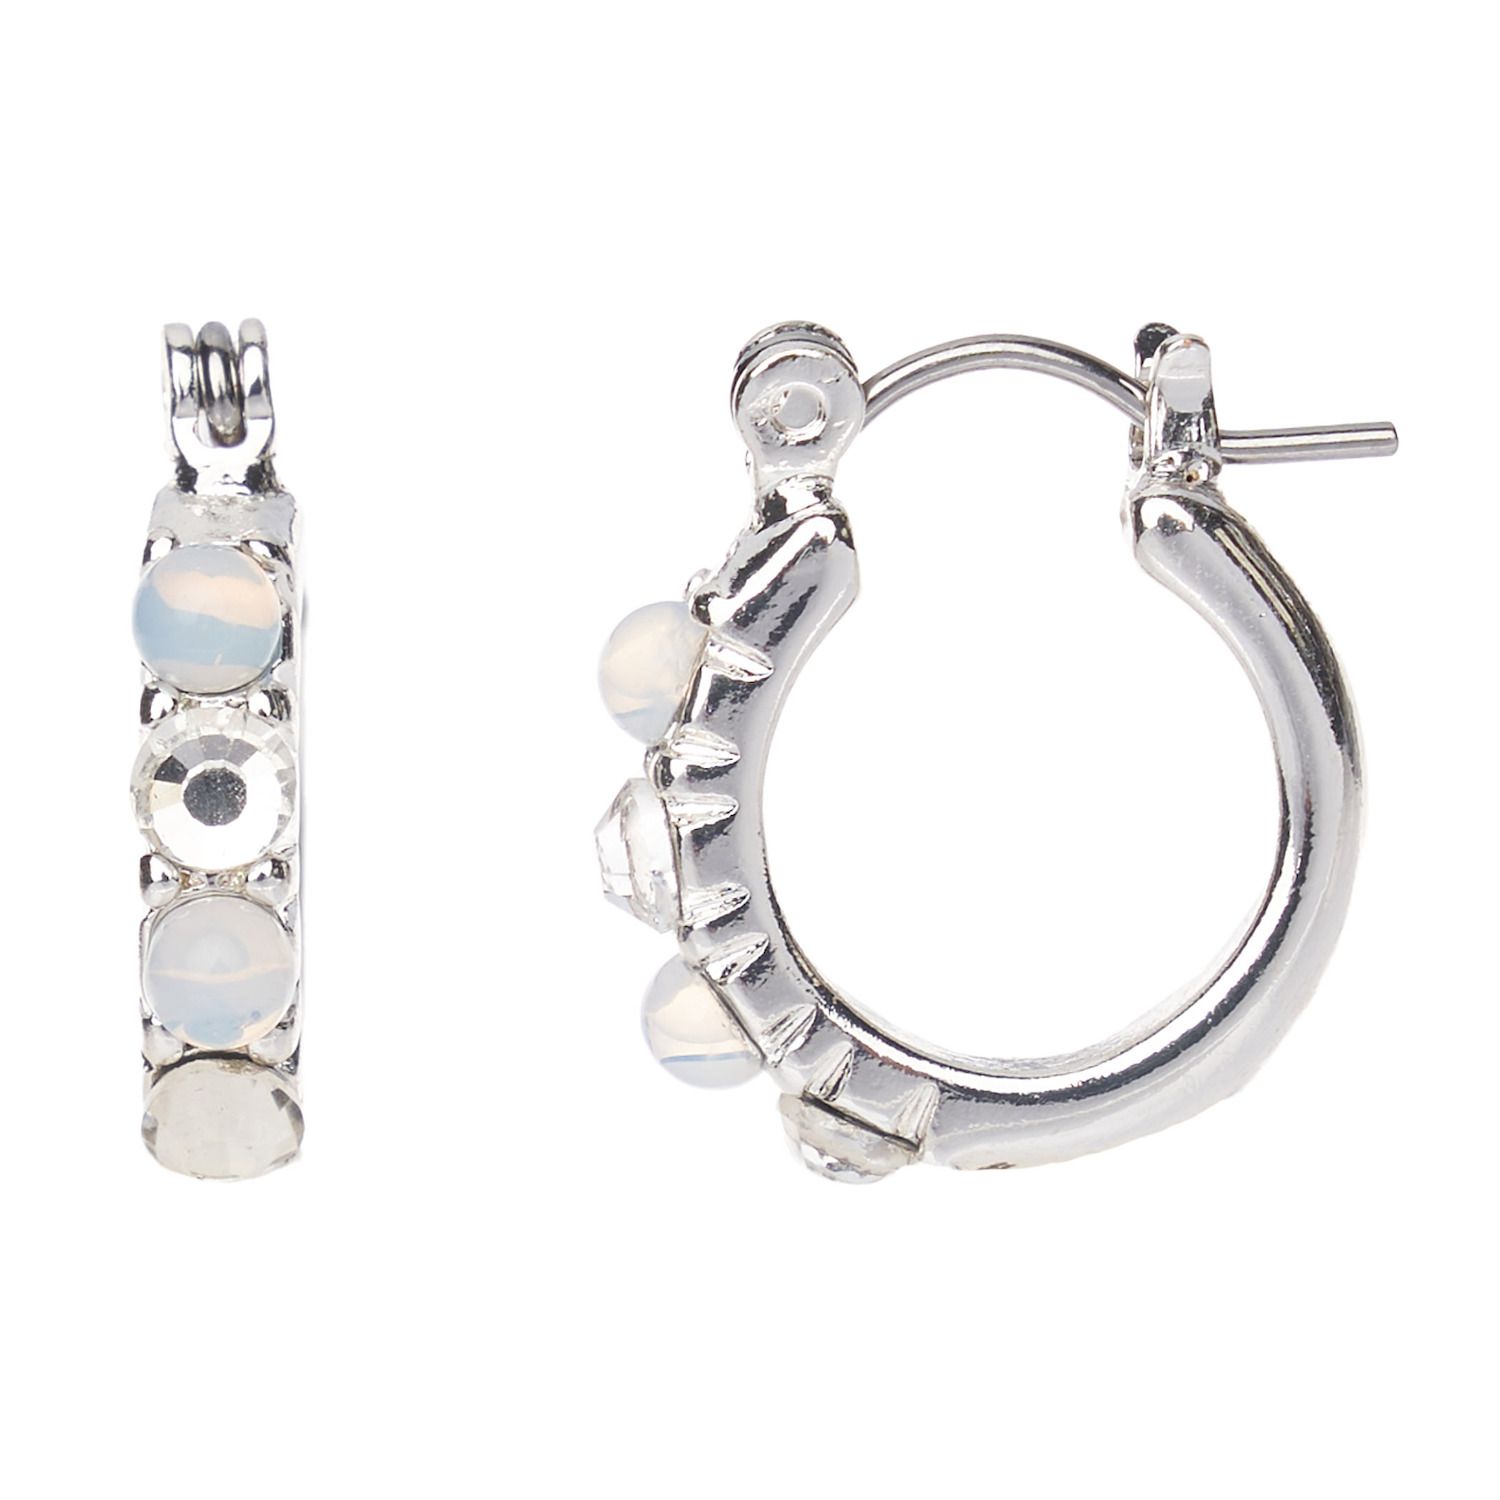 Image for LC Lauren Conrad Silver Tone Simulated Moonstone & Simulated Crystal Mini Hoop Earrings at Kohl's.